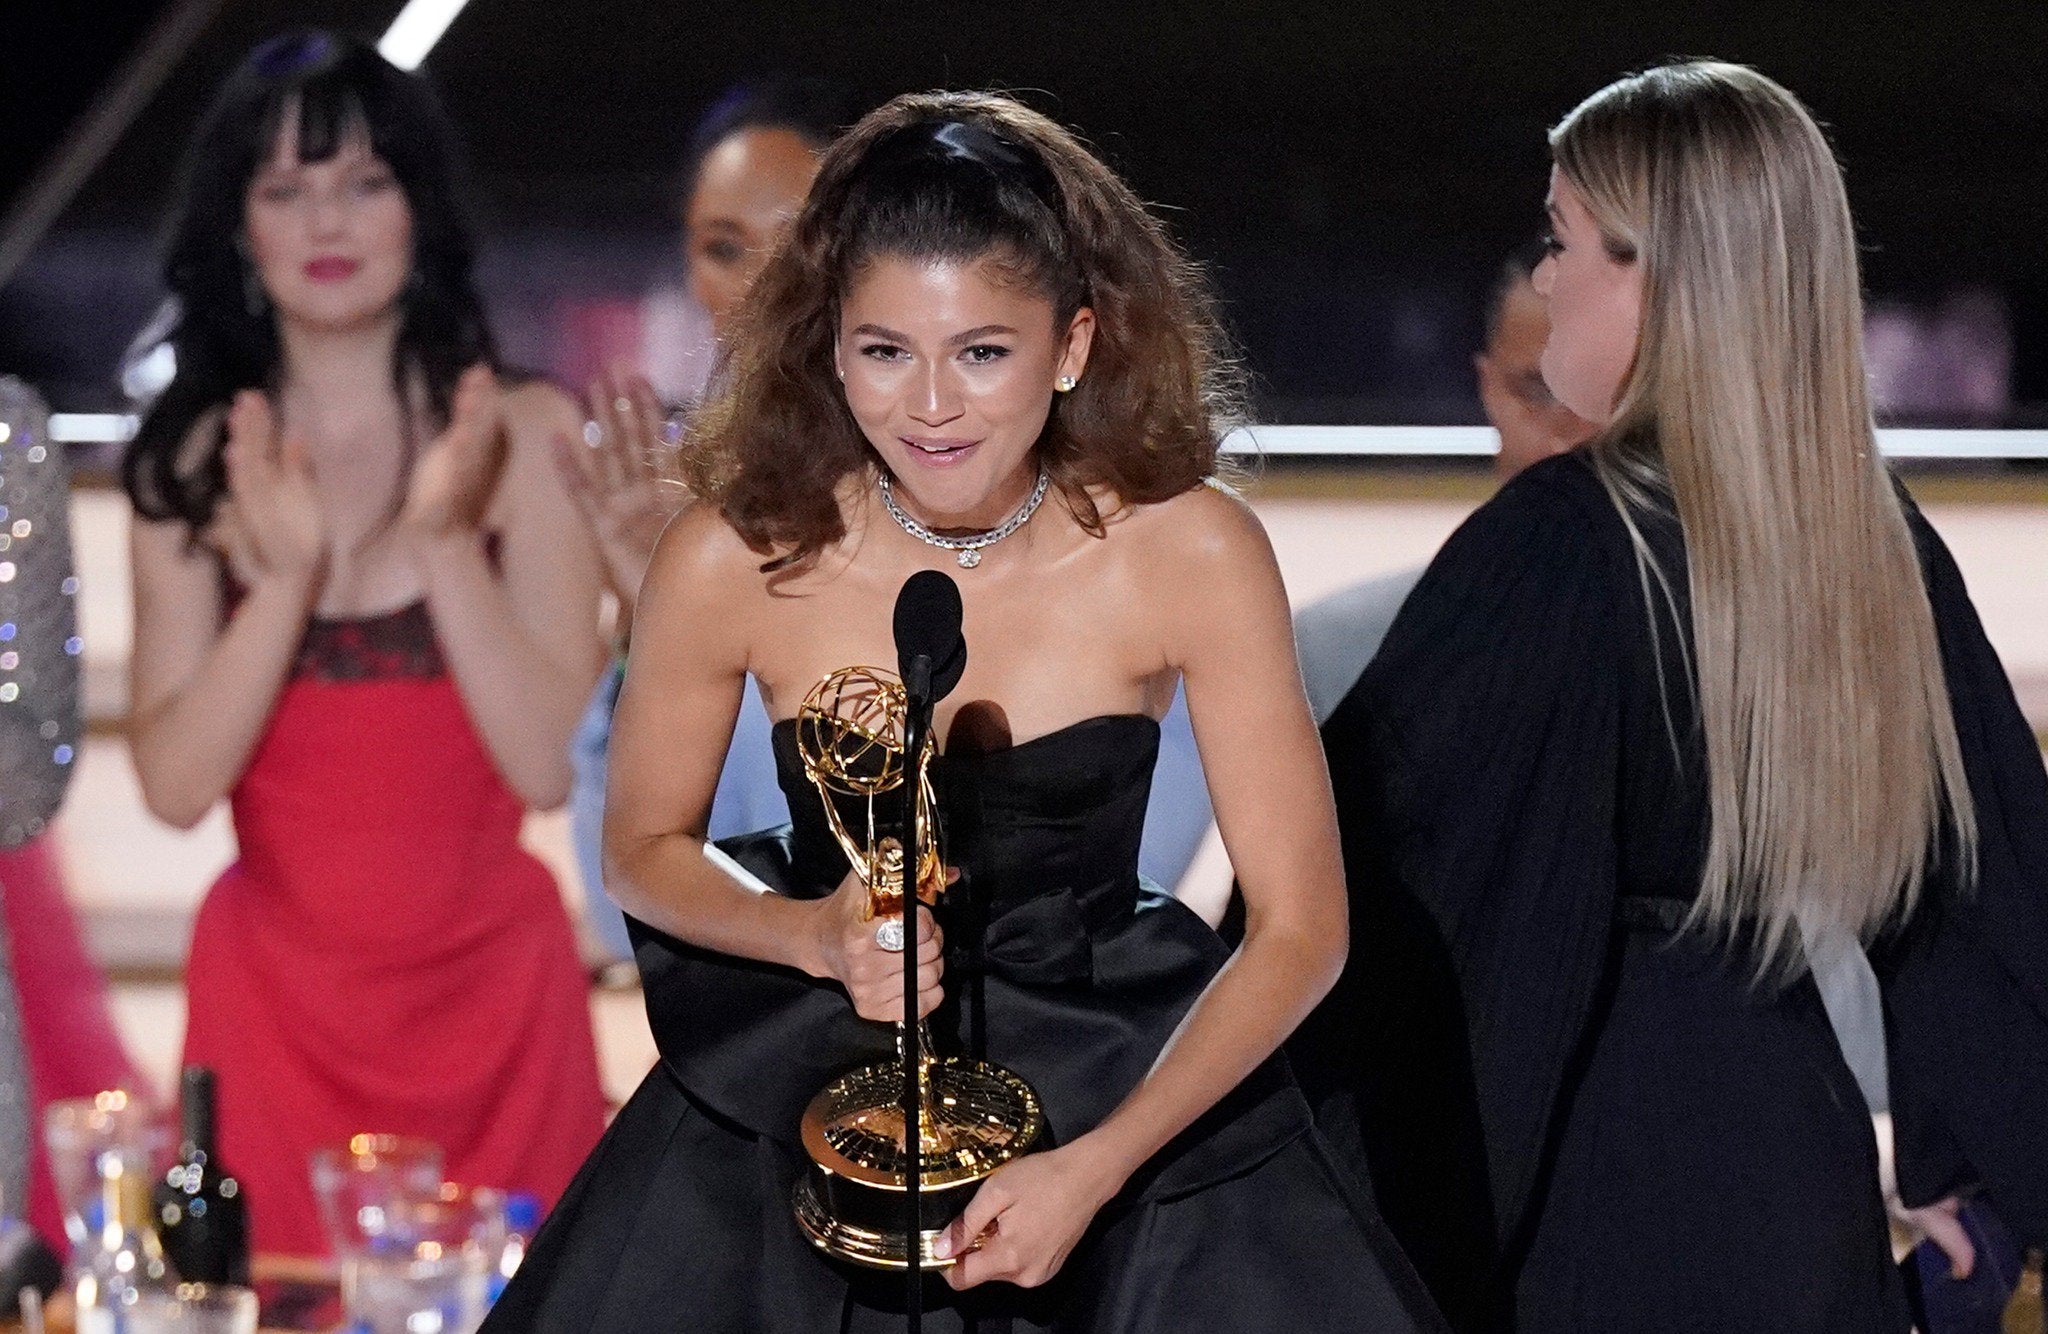 Emmy Awards 2022: "Succession" - The Big Winner. Zendaya - Best Actress In A Drama Series - DSF Antique Jewelry